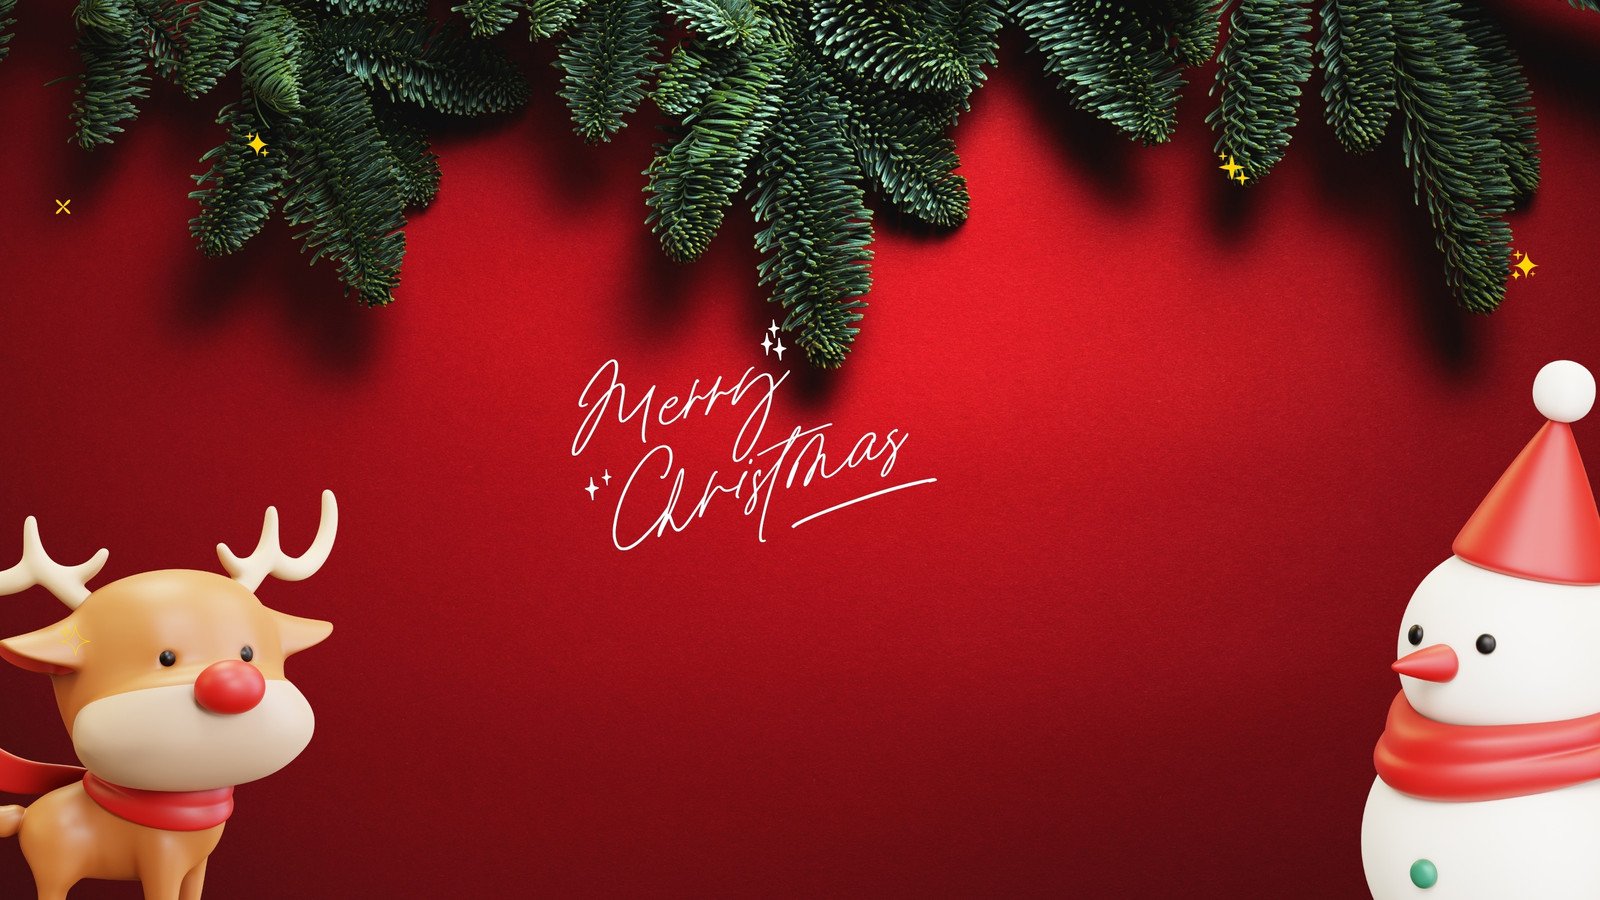 Details 100 christmas zoom background 